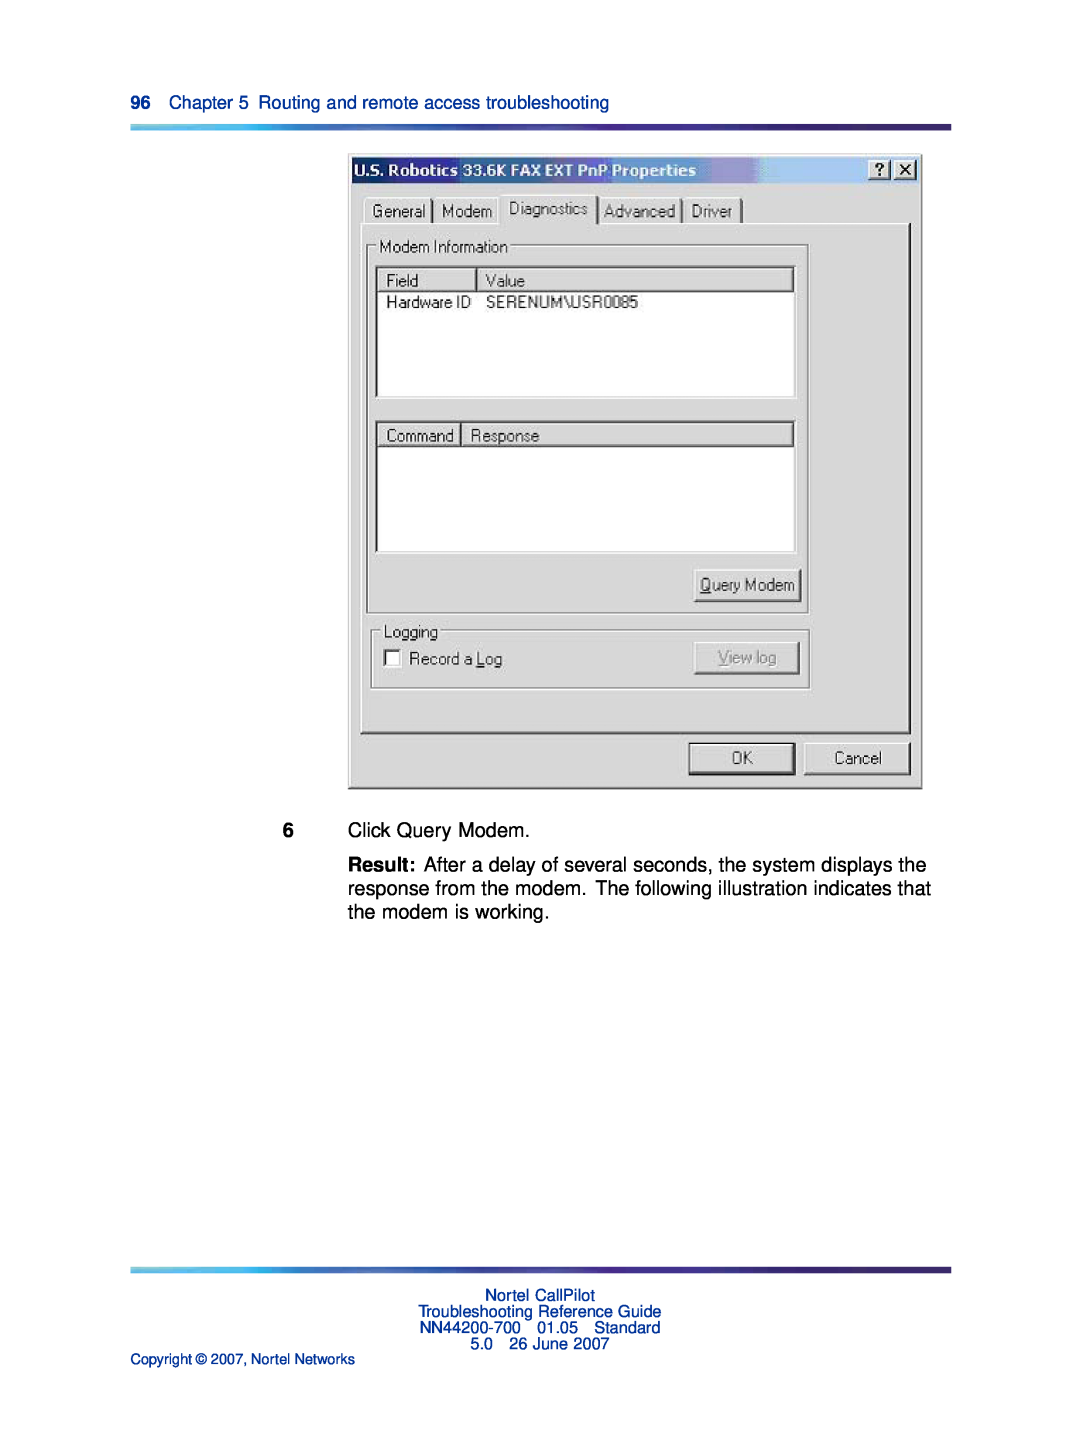 Nortel Networks NN44200-700 Click Query Modem, Routing and remote access troubleshooting, Copyright 2007, Nortel Networks 